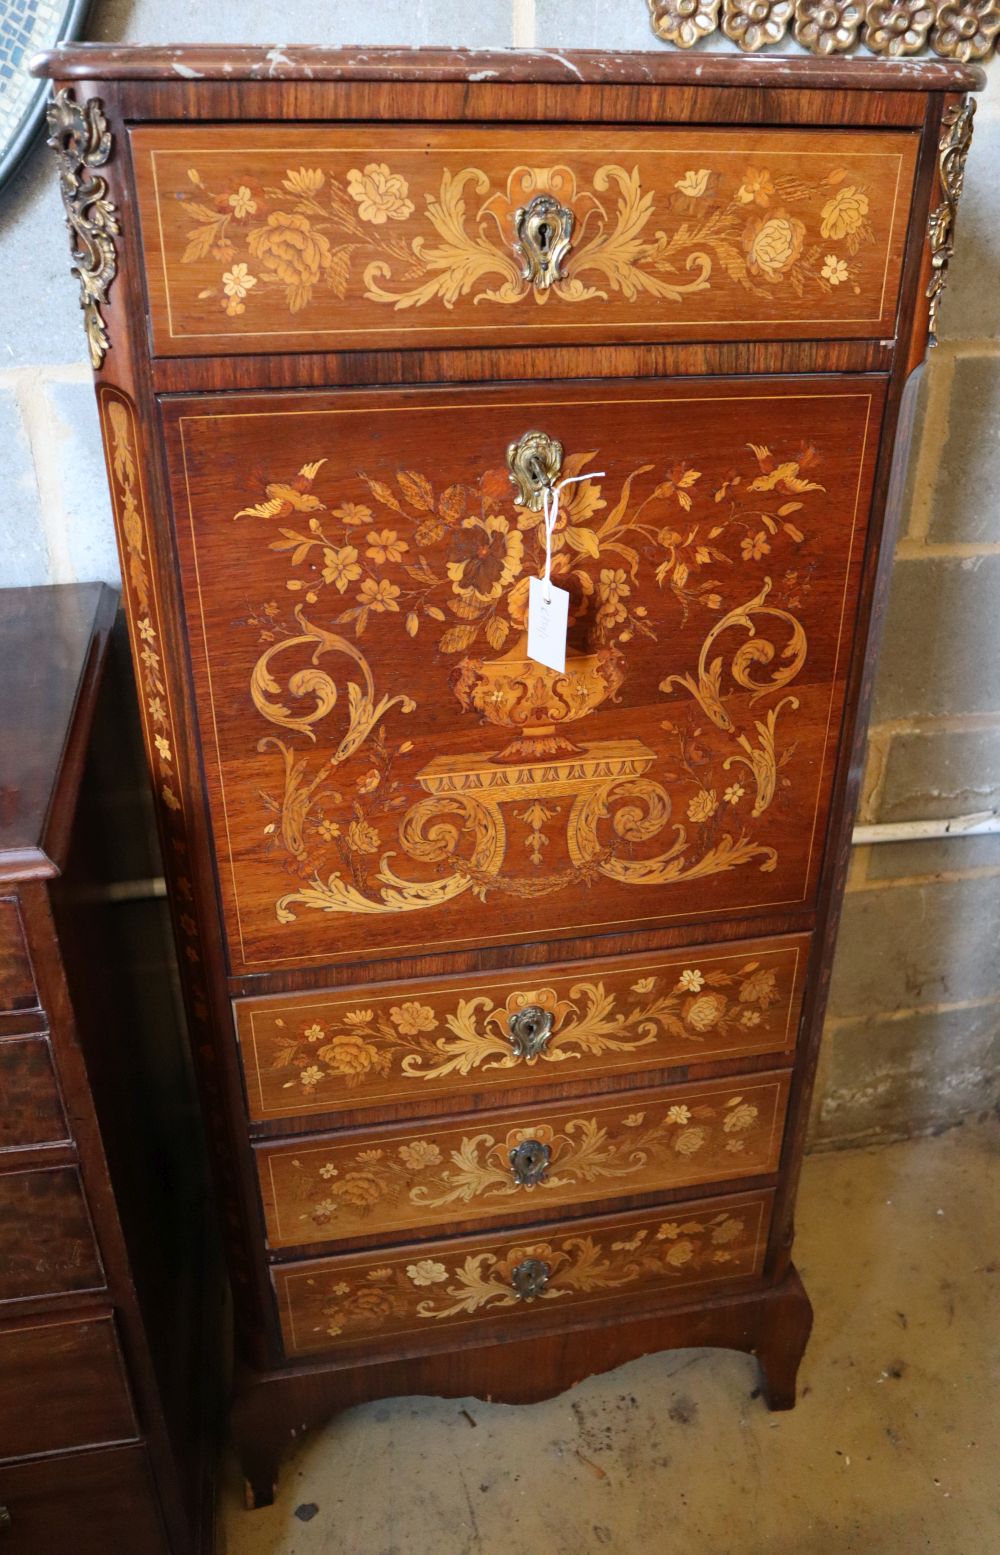 An early 20th century French marquetry inlaid rosewood secretaire chest with marble top, width 64cm, depth 37cm, height 142cm